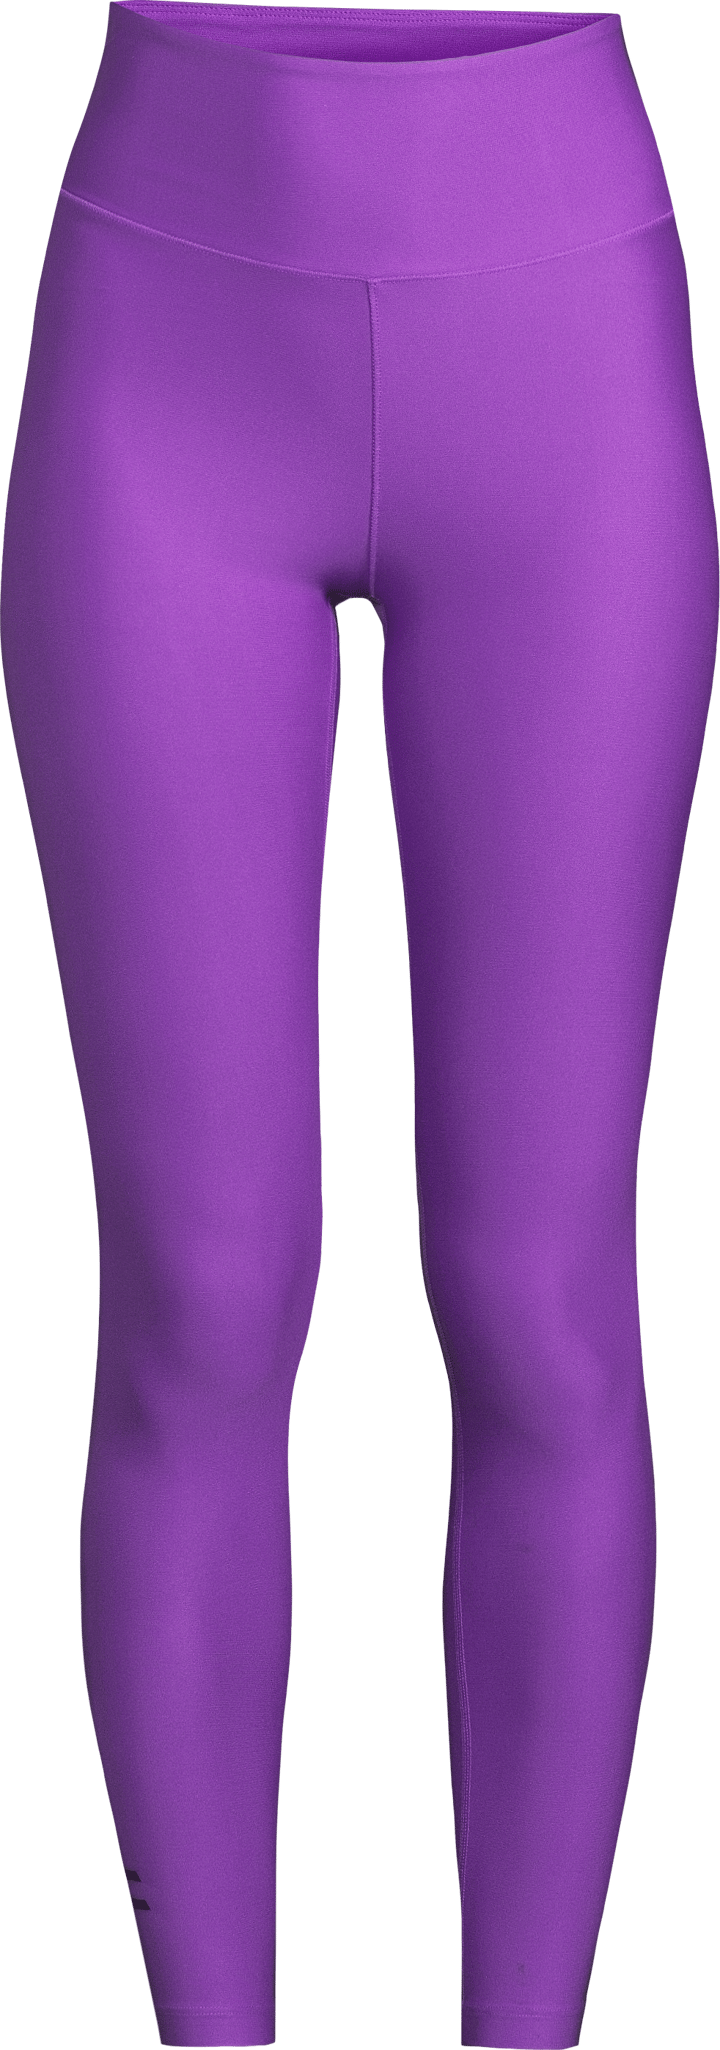 Casall Women's Graphic Sport Tights Liberty Lilac Casall